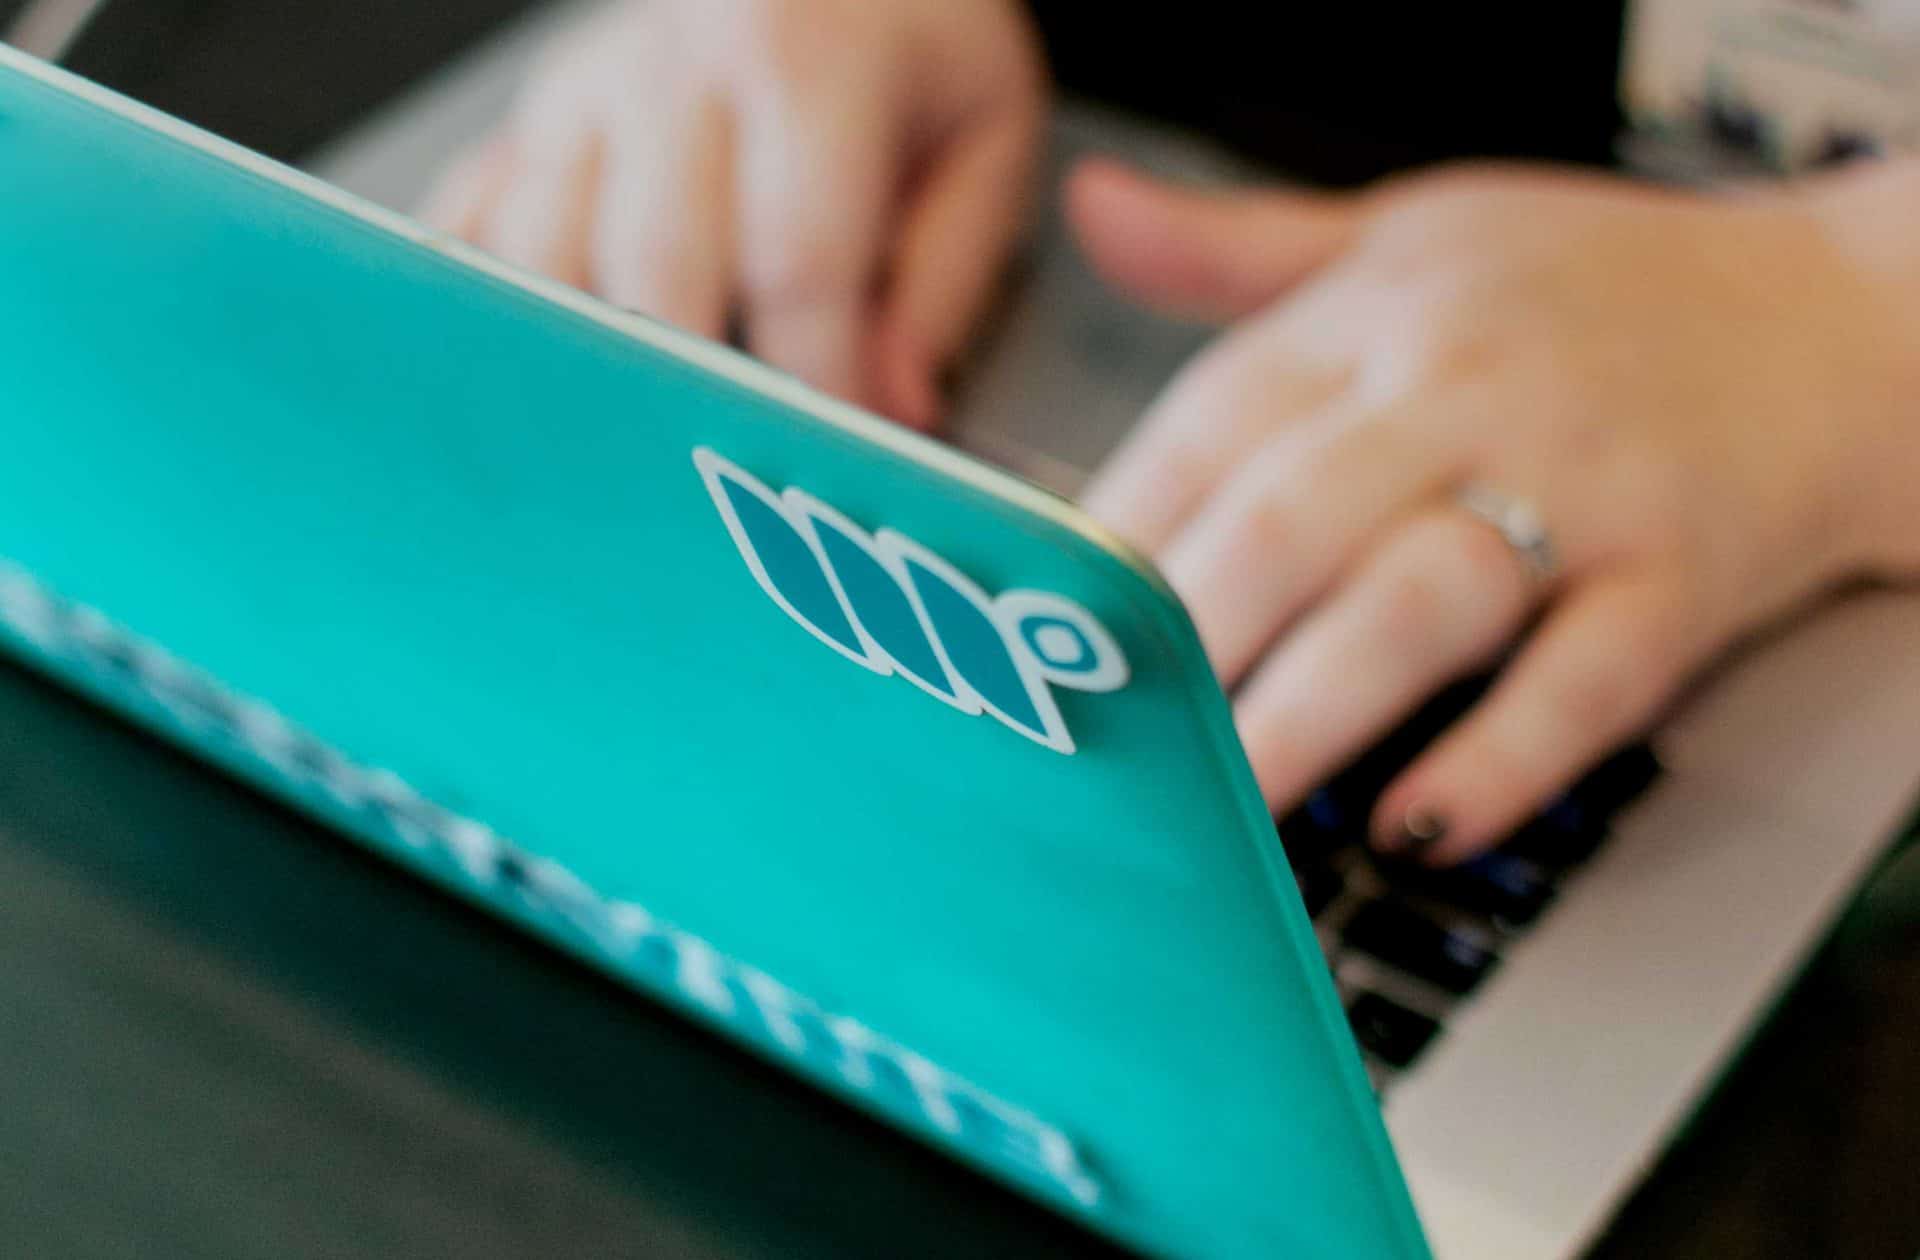 woman's hands typing on a teal computer covered in Mediavine stickers